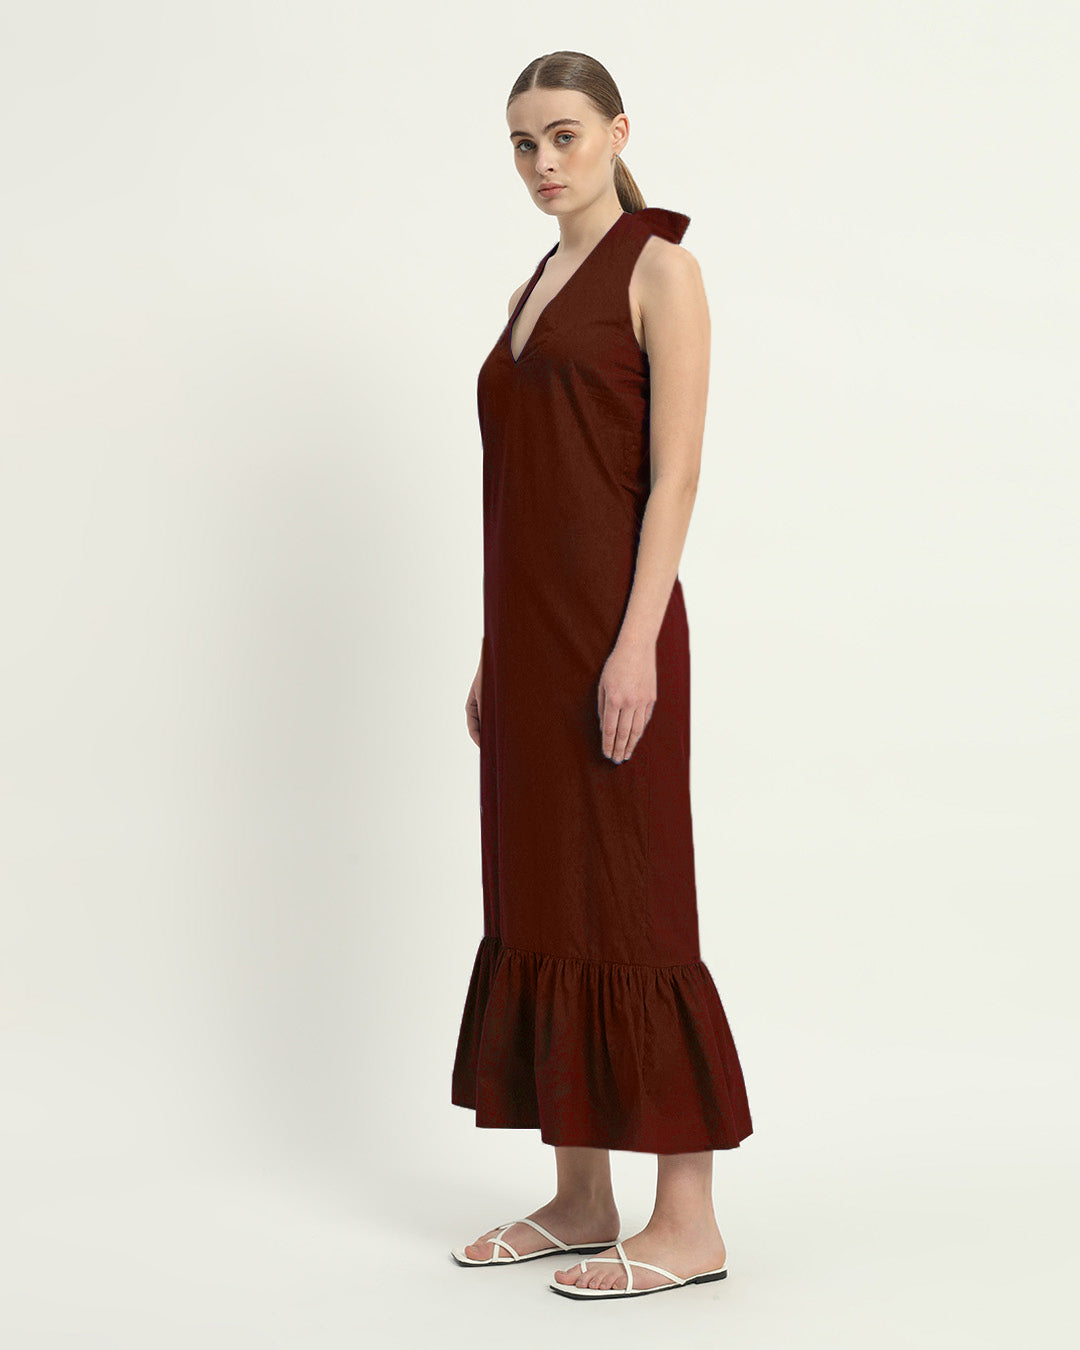 The Rouge Wellsville Cotton Dress